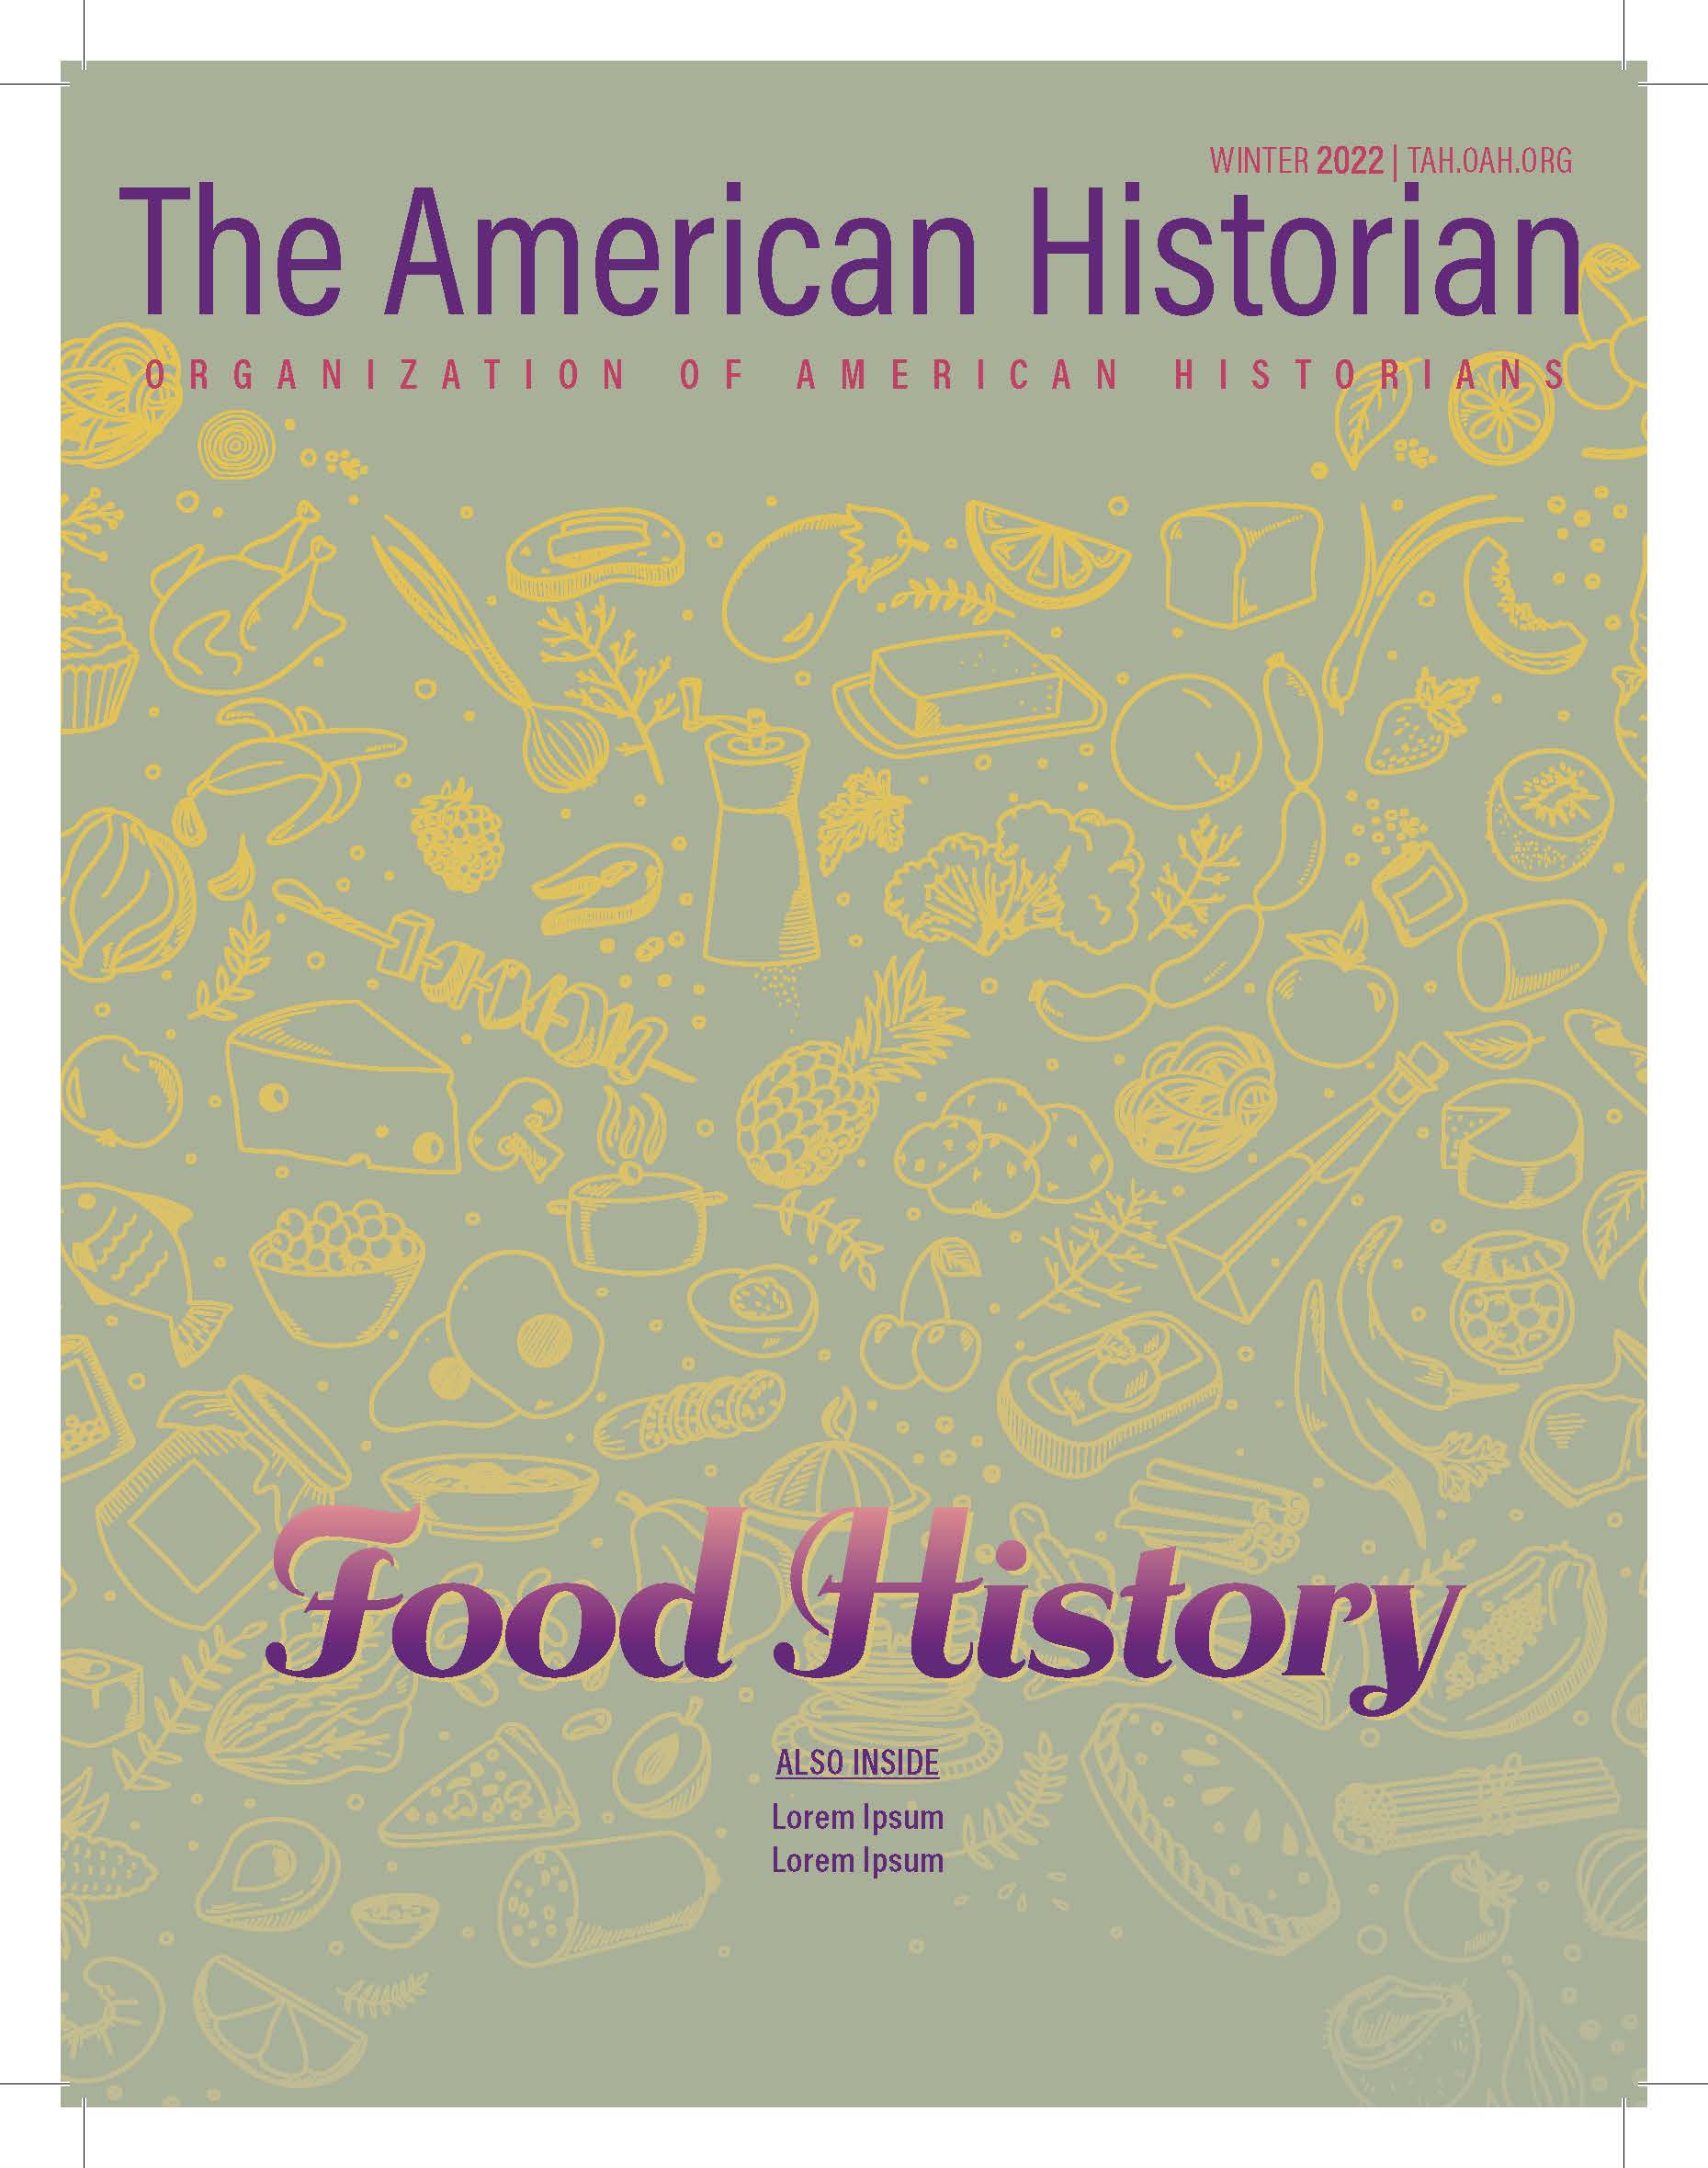 Cover image with link to The American Historian issue for Food History